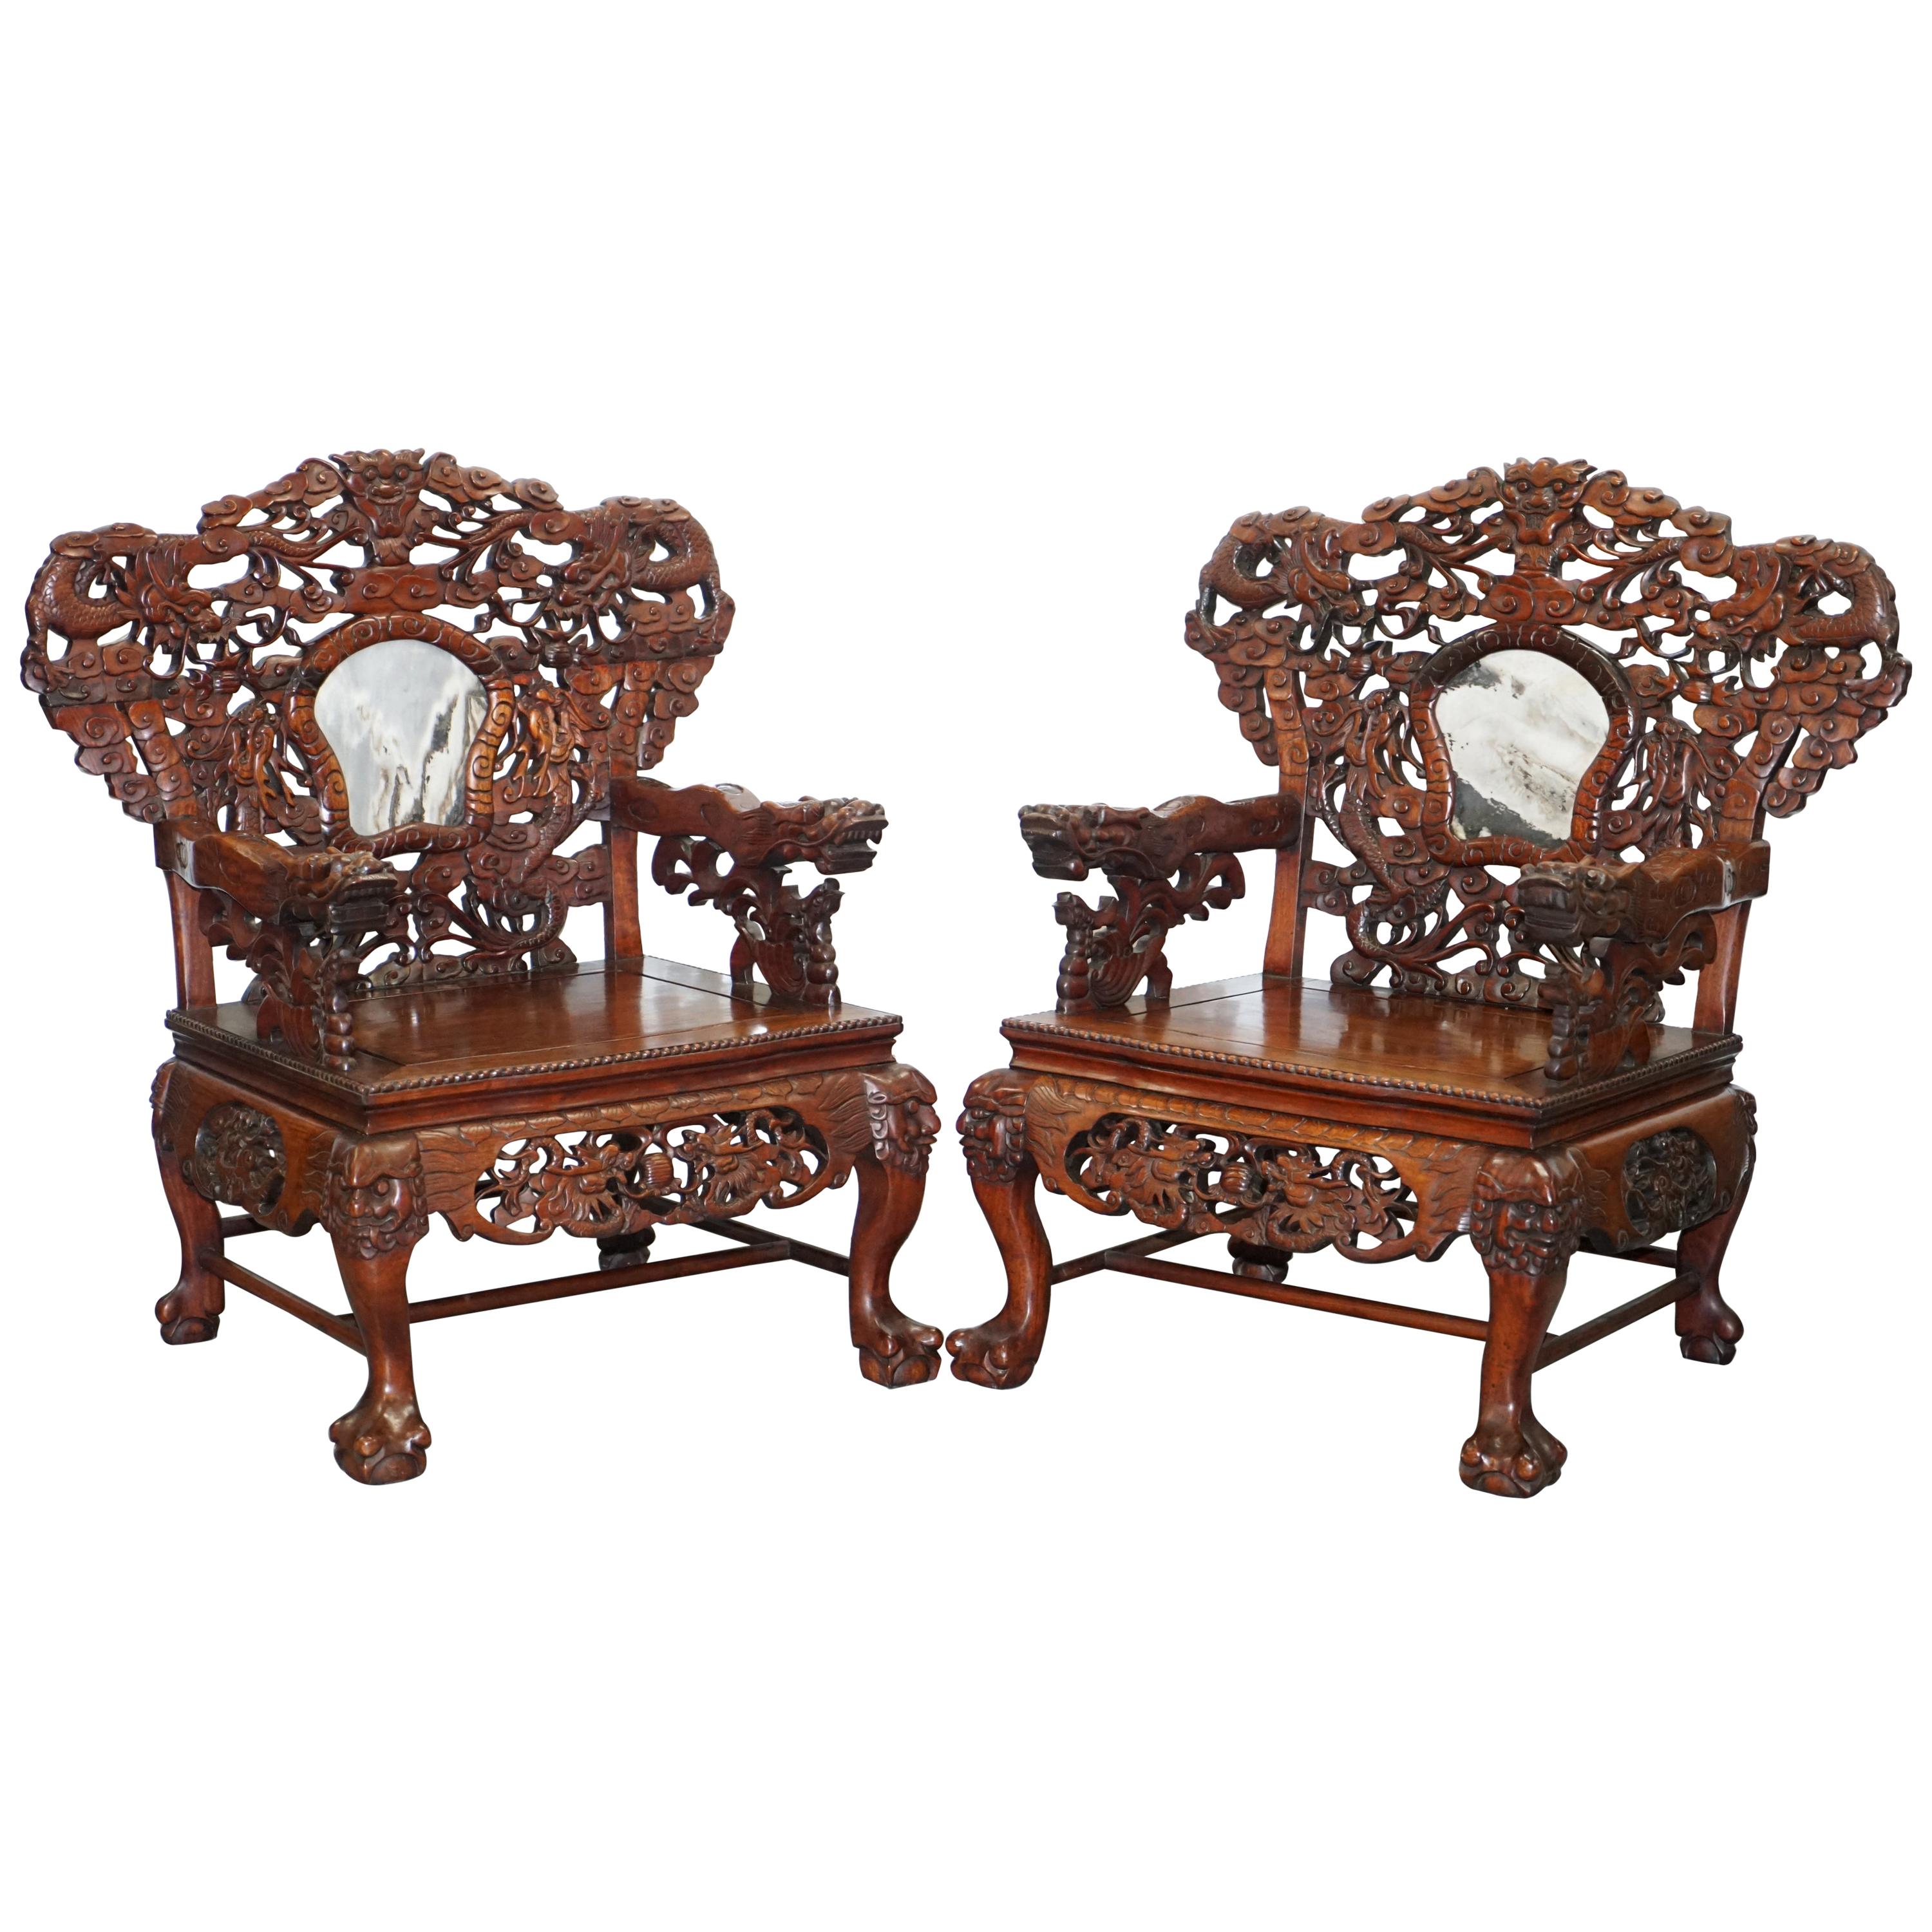 Very Rare Pair of Large Marble Backed Chinese Dragon Carved Throne Armchairs